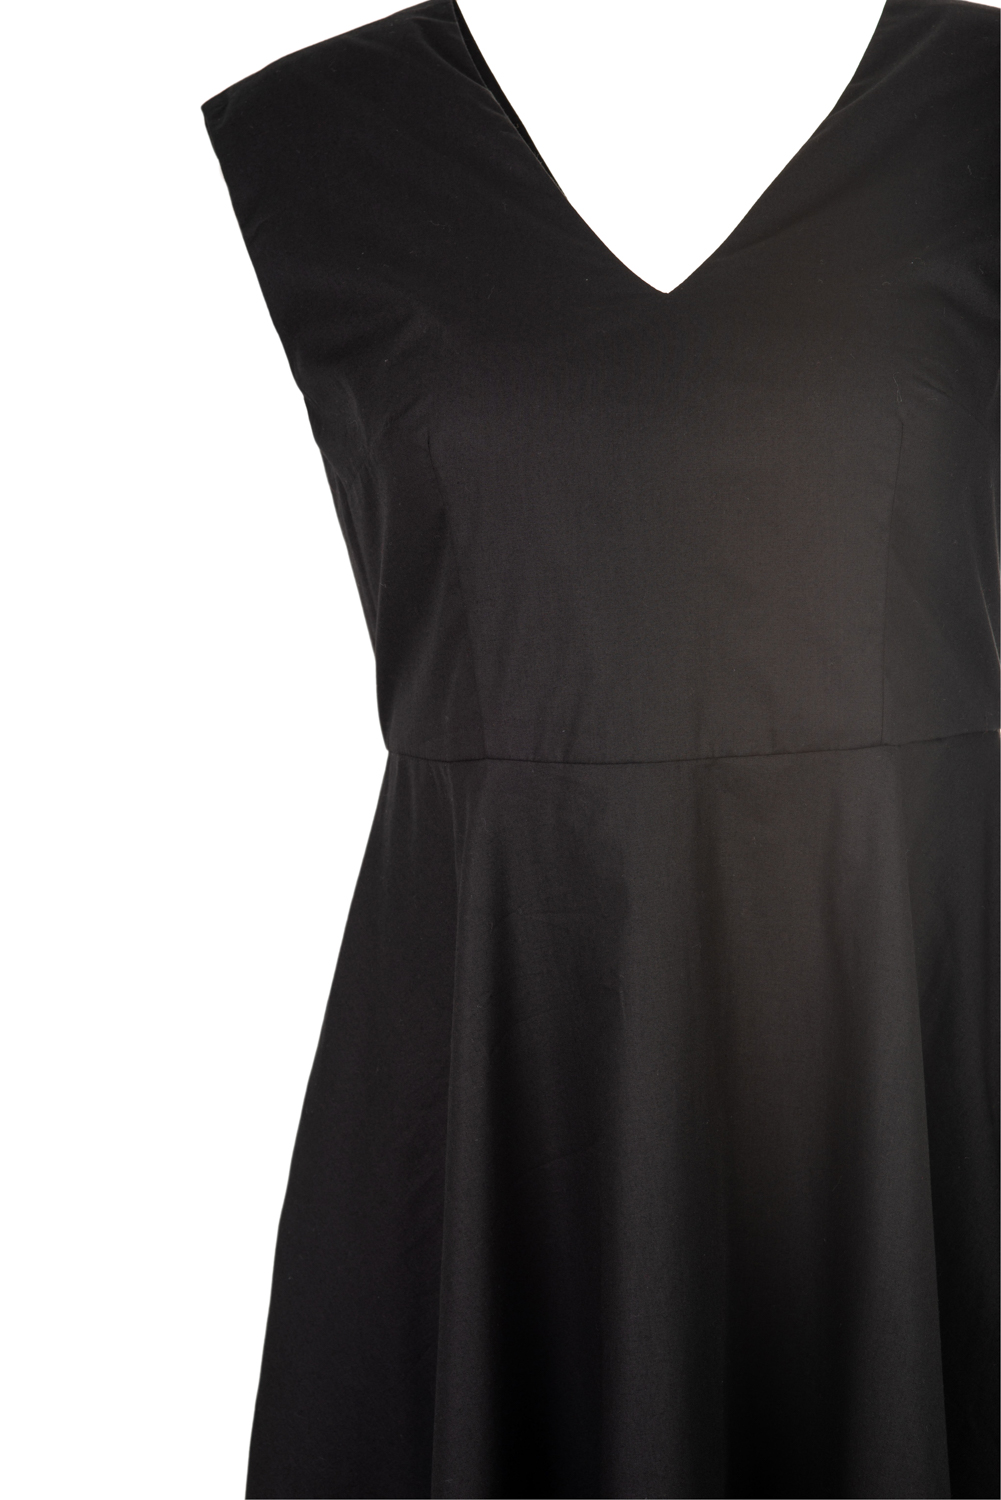 Fit and Flare Retro Style Dress (with Side Pockets)